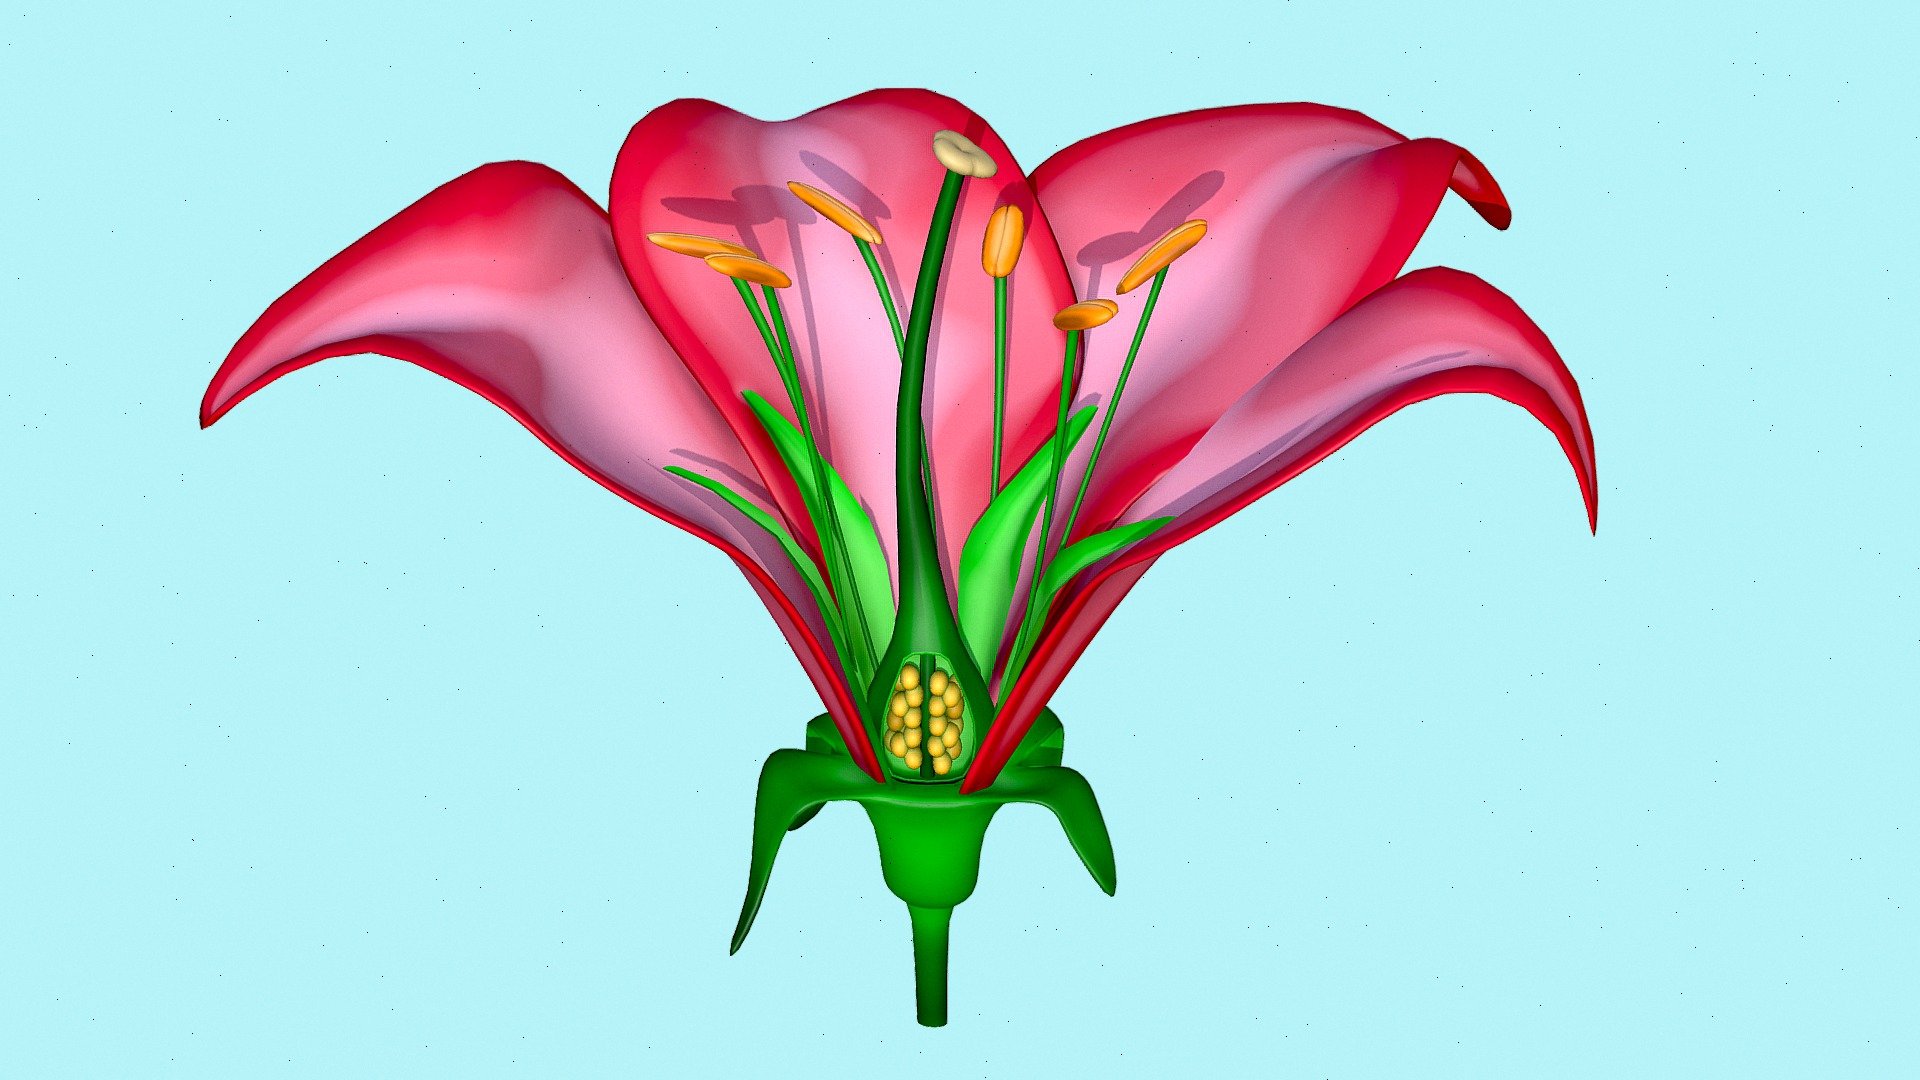 The morphology of a flower, or its form and structure, can be considered in two parts: the vegetative part, consisting of non-reproductive structures such as petals; and the reproductive or sexual parts. A stereotypical flower is made up of four kinds of structures attached to the tip of a short stalk or axis, called a receptacle. Each of these parts or floral organs is arranged in a spiral called a whorl. The four main whorls (starting from the base of the flower or lowest node and working upwards) are the calyx, corolla, androecium, and gynoecium. Together the calyx and corolla make up the non-reproductive part of the flower called the perianth, and in some cases may not be differentiated. If this is the case, then they are described as tepals 3d model